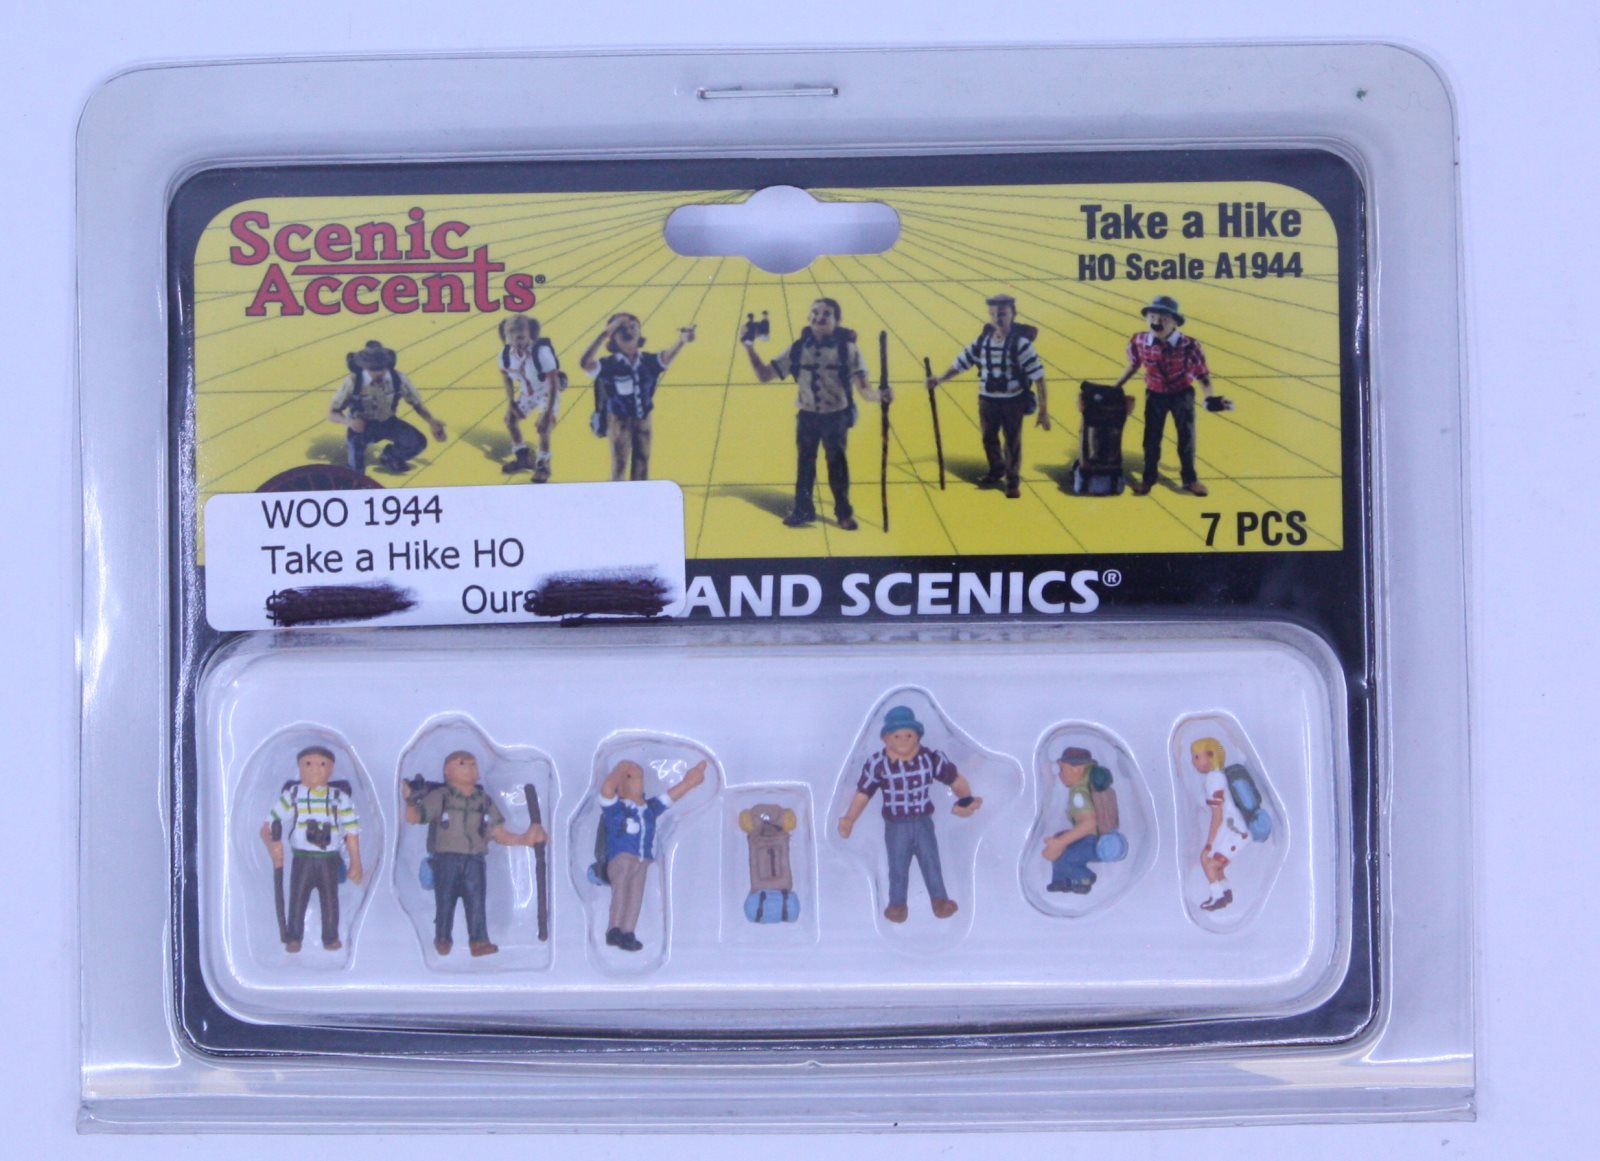 Woodland Scenics A1944 HO Scenic Accents Take a Hike Figures (Set of 7)